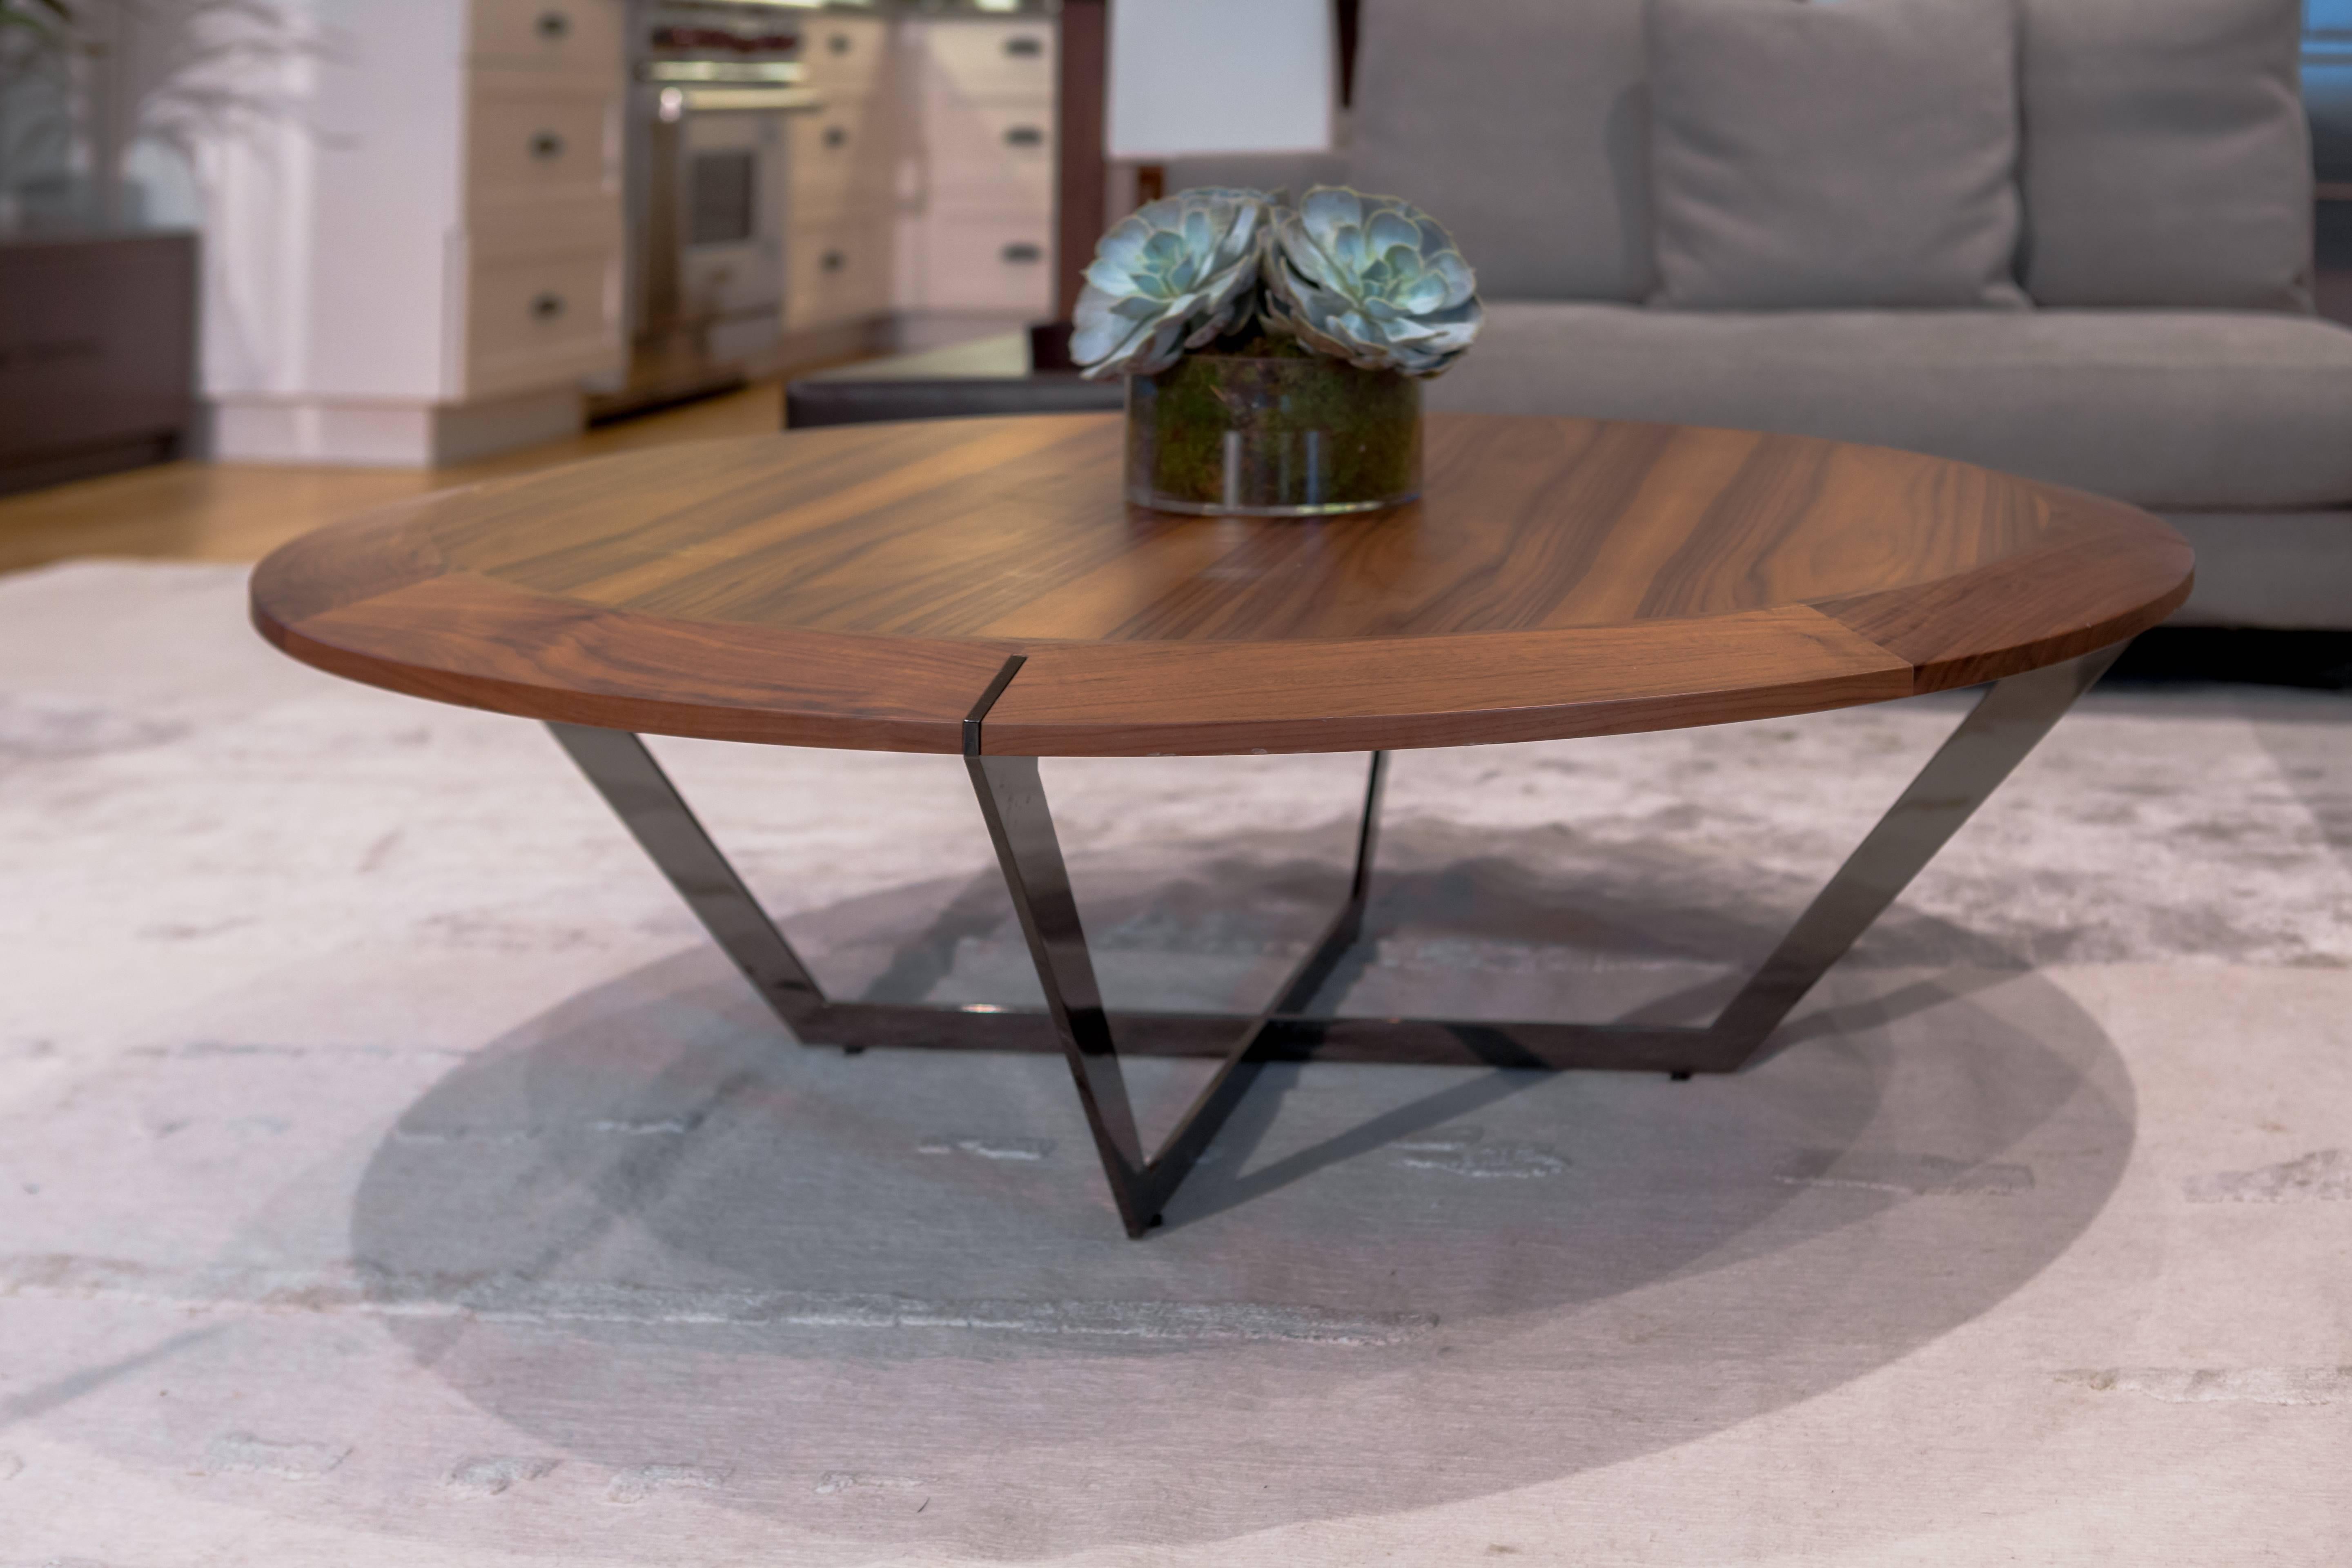 The Diamond table is a round coffee table with metal finish legs. It is a part of our Heritage collection. Designed with tradition, comfort and elegance in mind, crafted by hand. It can be customized to fit your interior and needs by choosing from